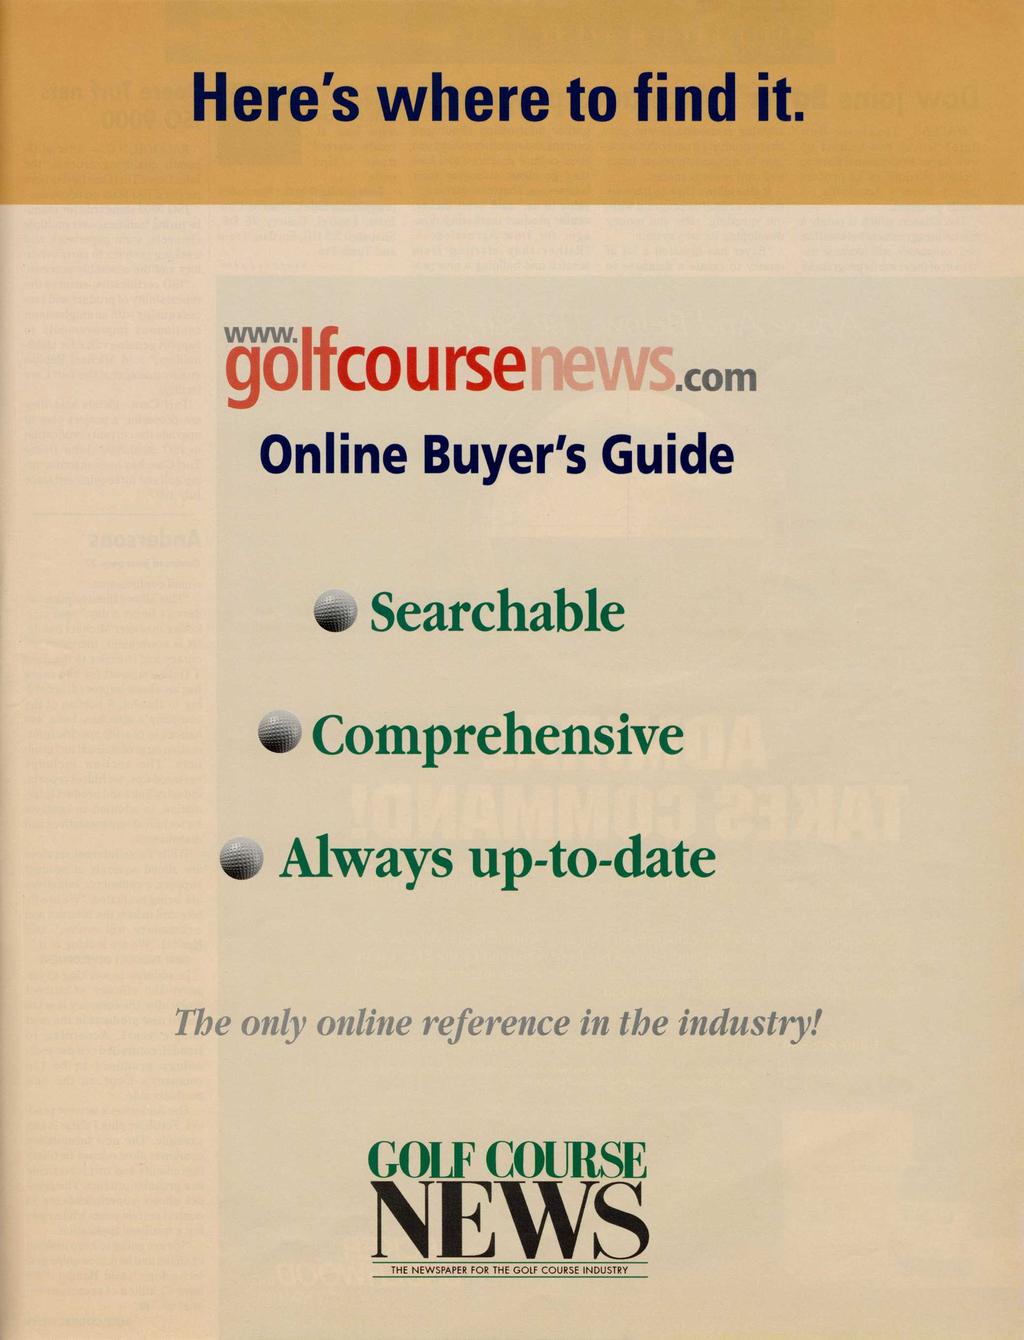 Here's where to find it Online Buyer's Guide Searchable Comprehensive Always up-to-date The